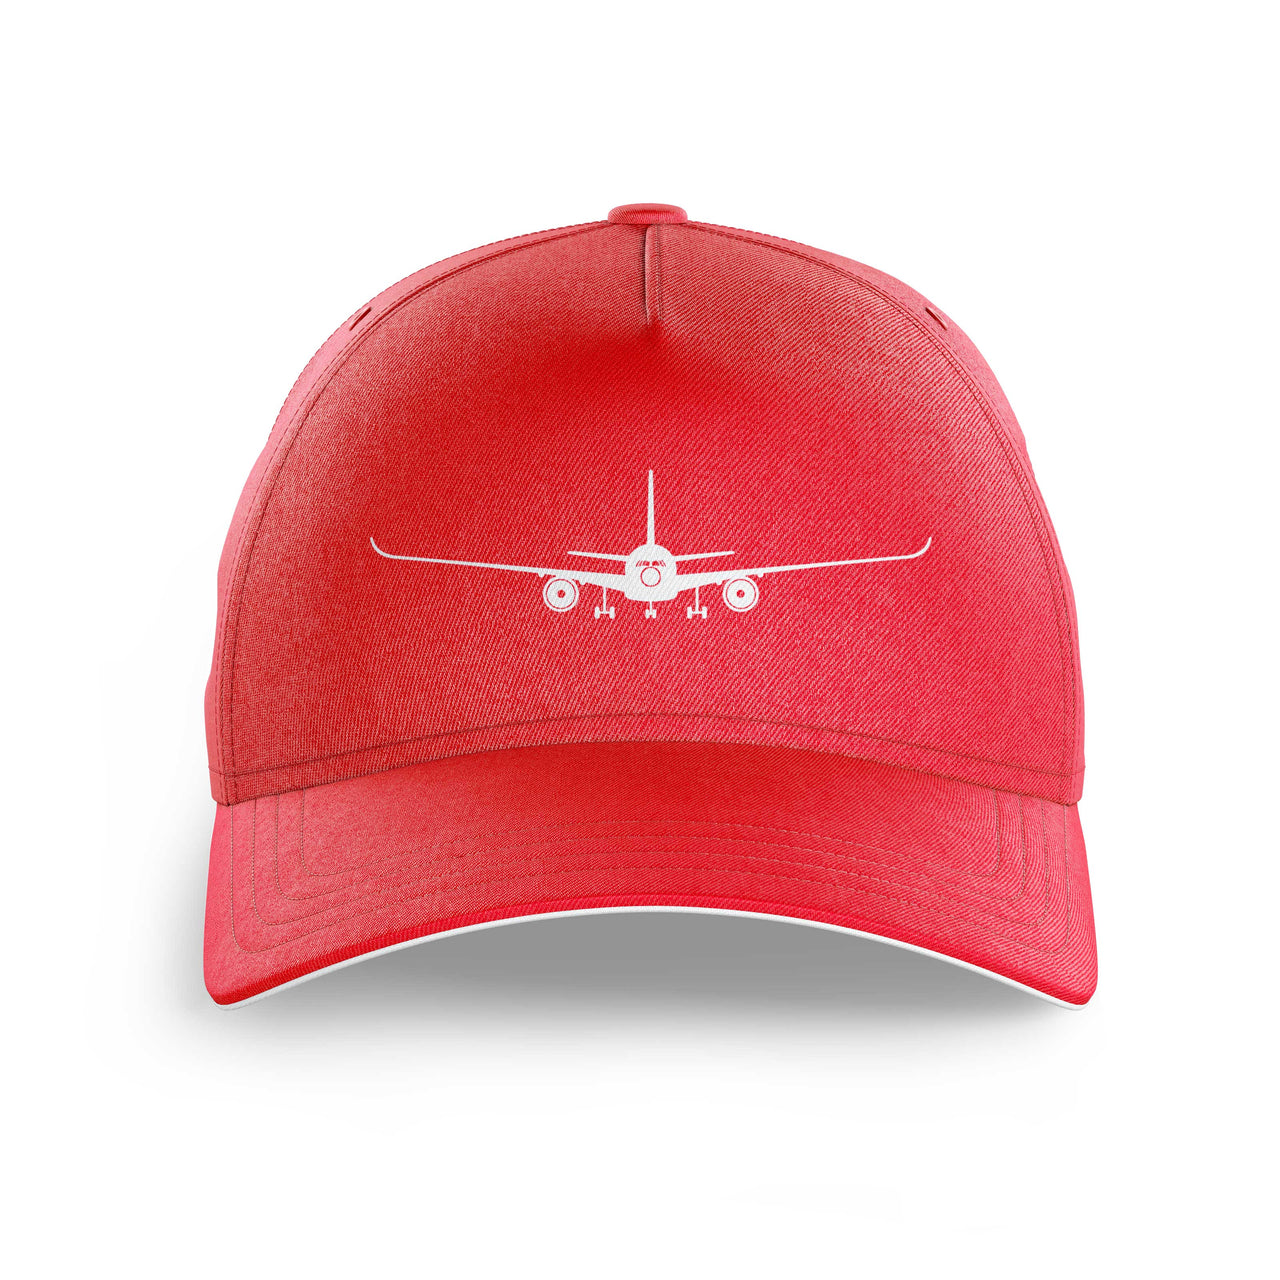 Airbus A350 Silhouette Printed Hats